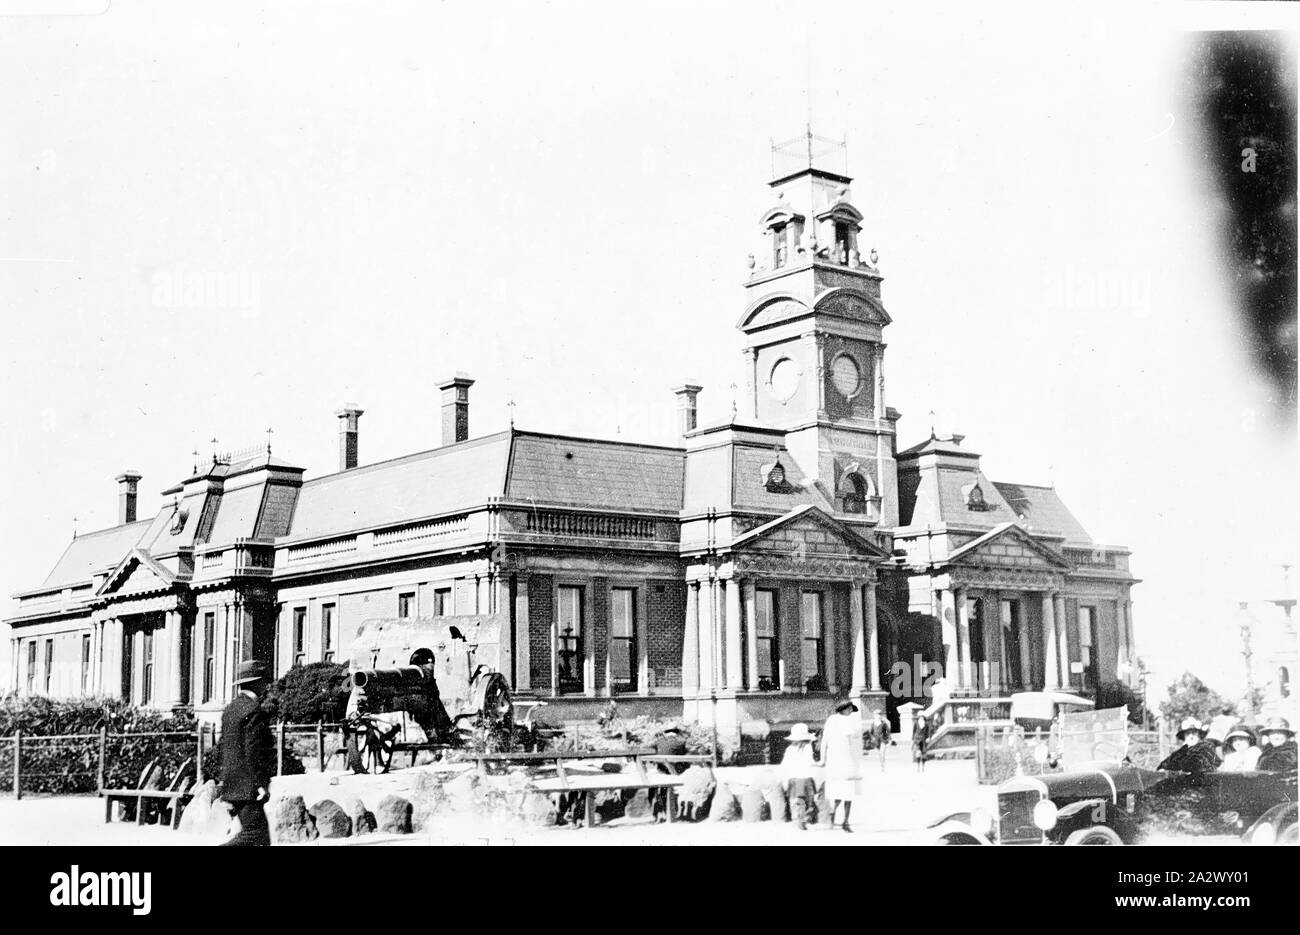 Negative - Ararat, Victoria, circa 1925, The Ararat Town Hall. There are three women in a motor car on the right and a field gun on display on the left Stock Photo